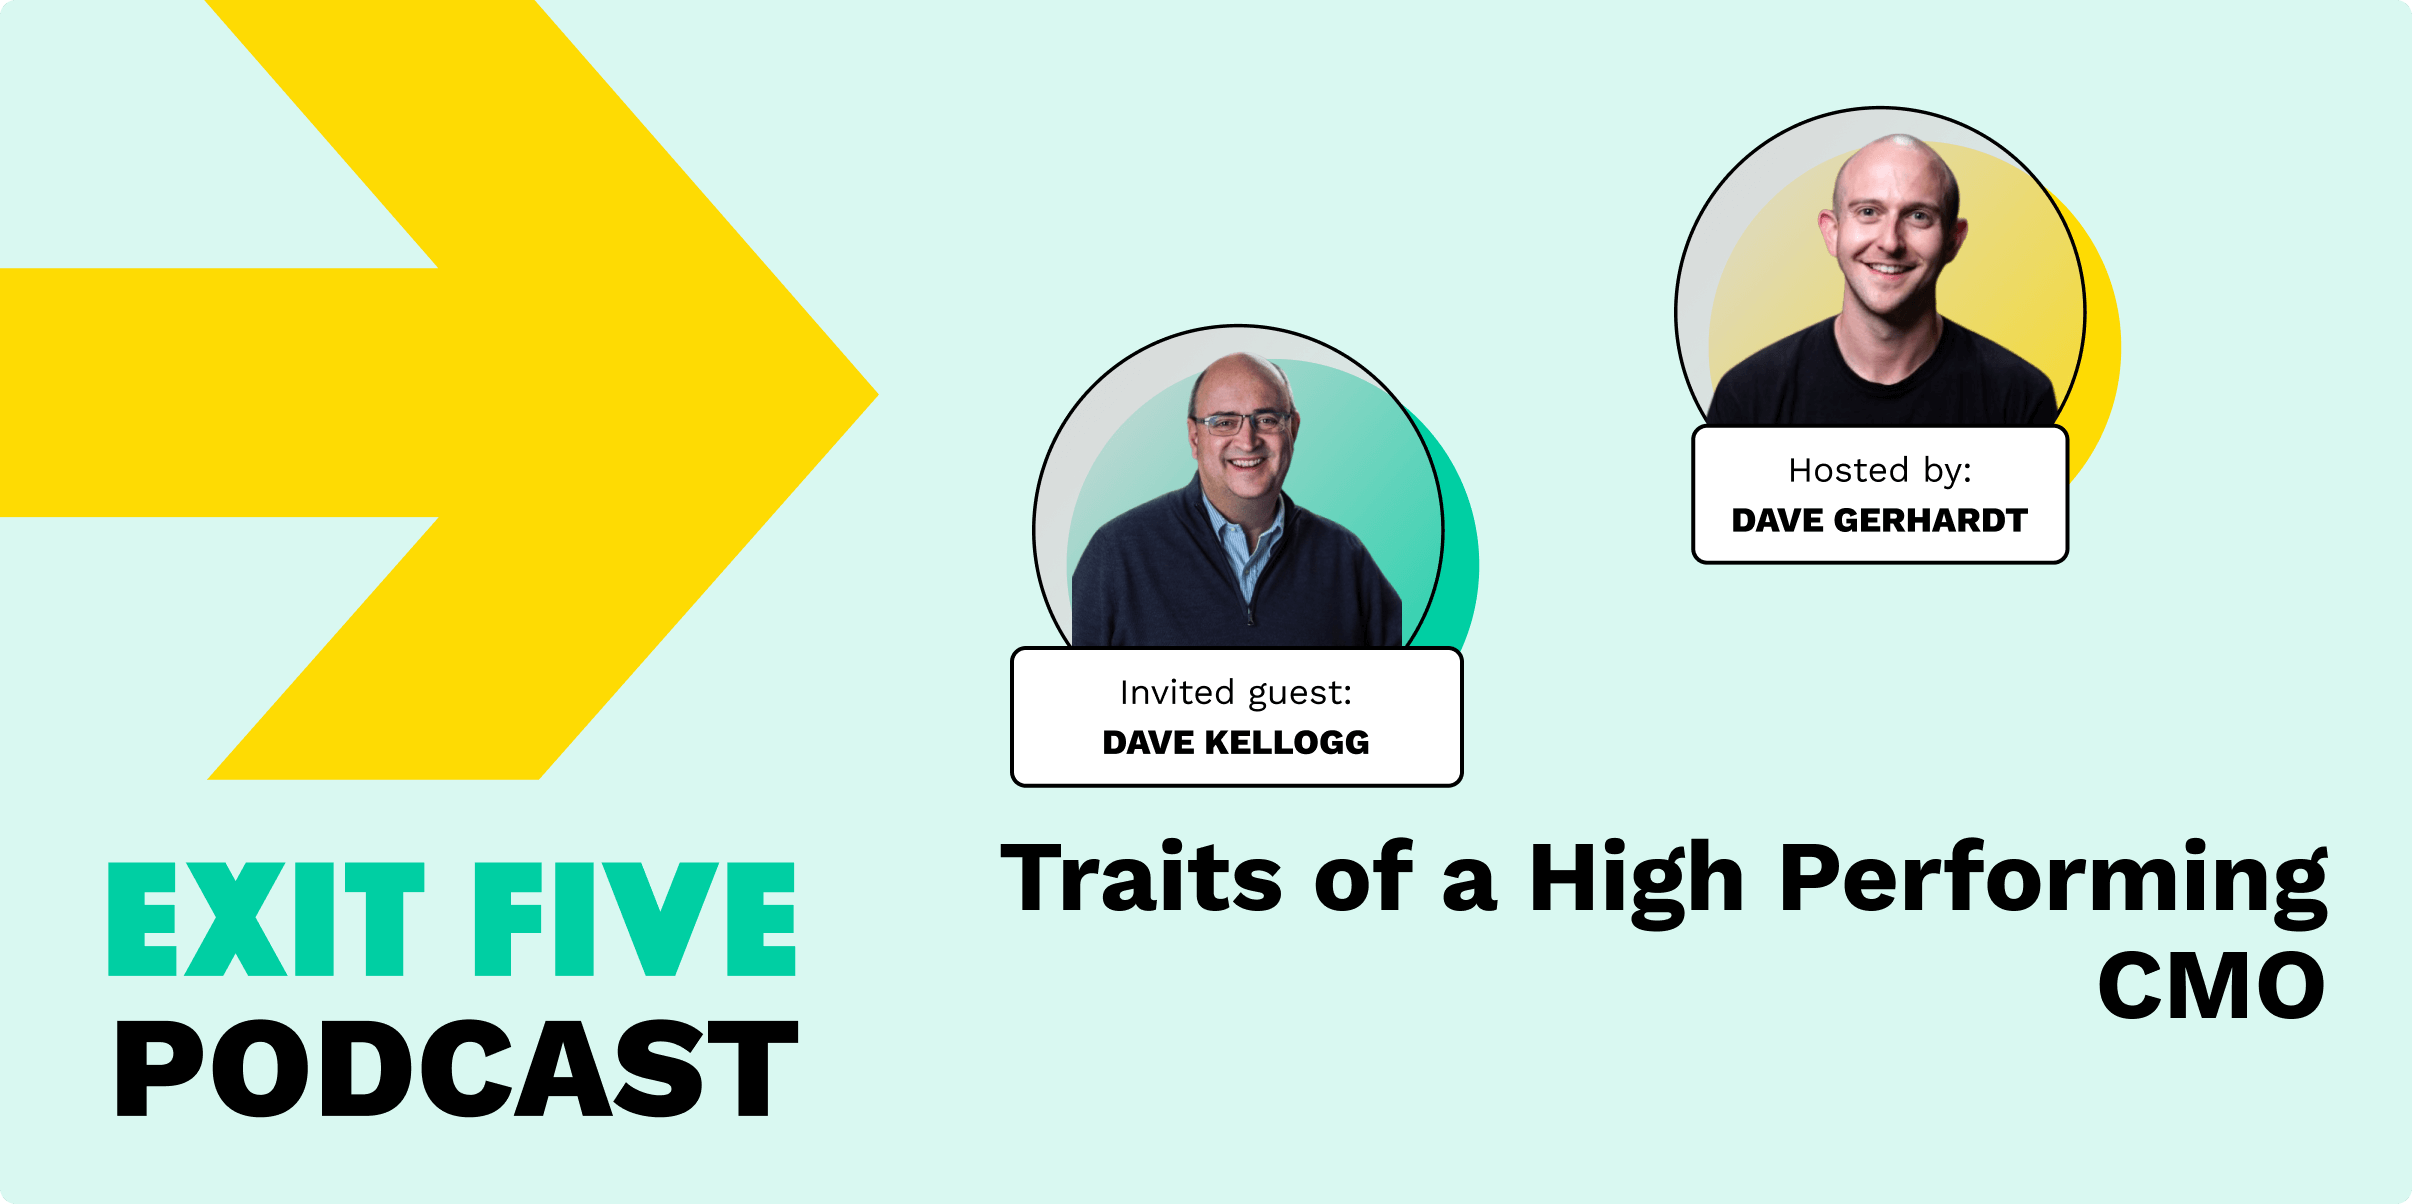 Dave Kellogg - Traits of a High Performing CMO